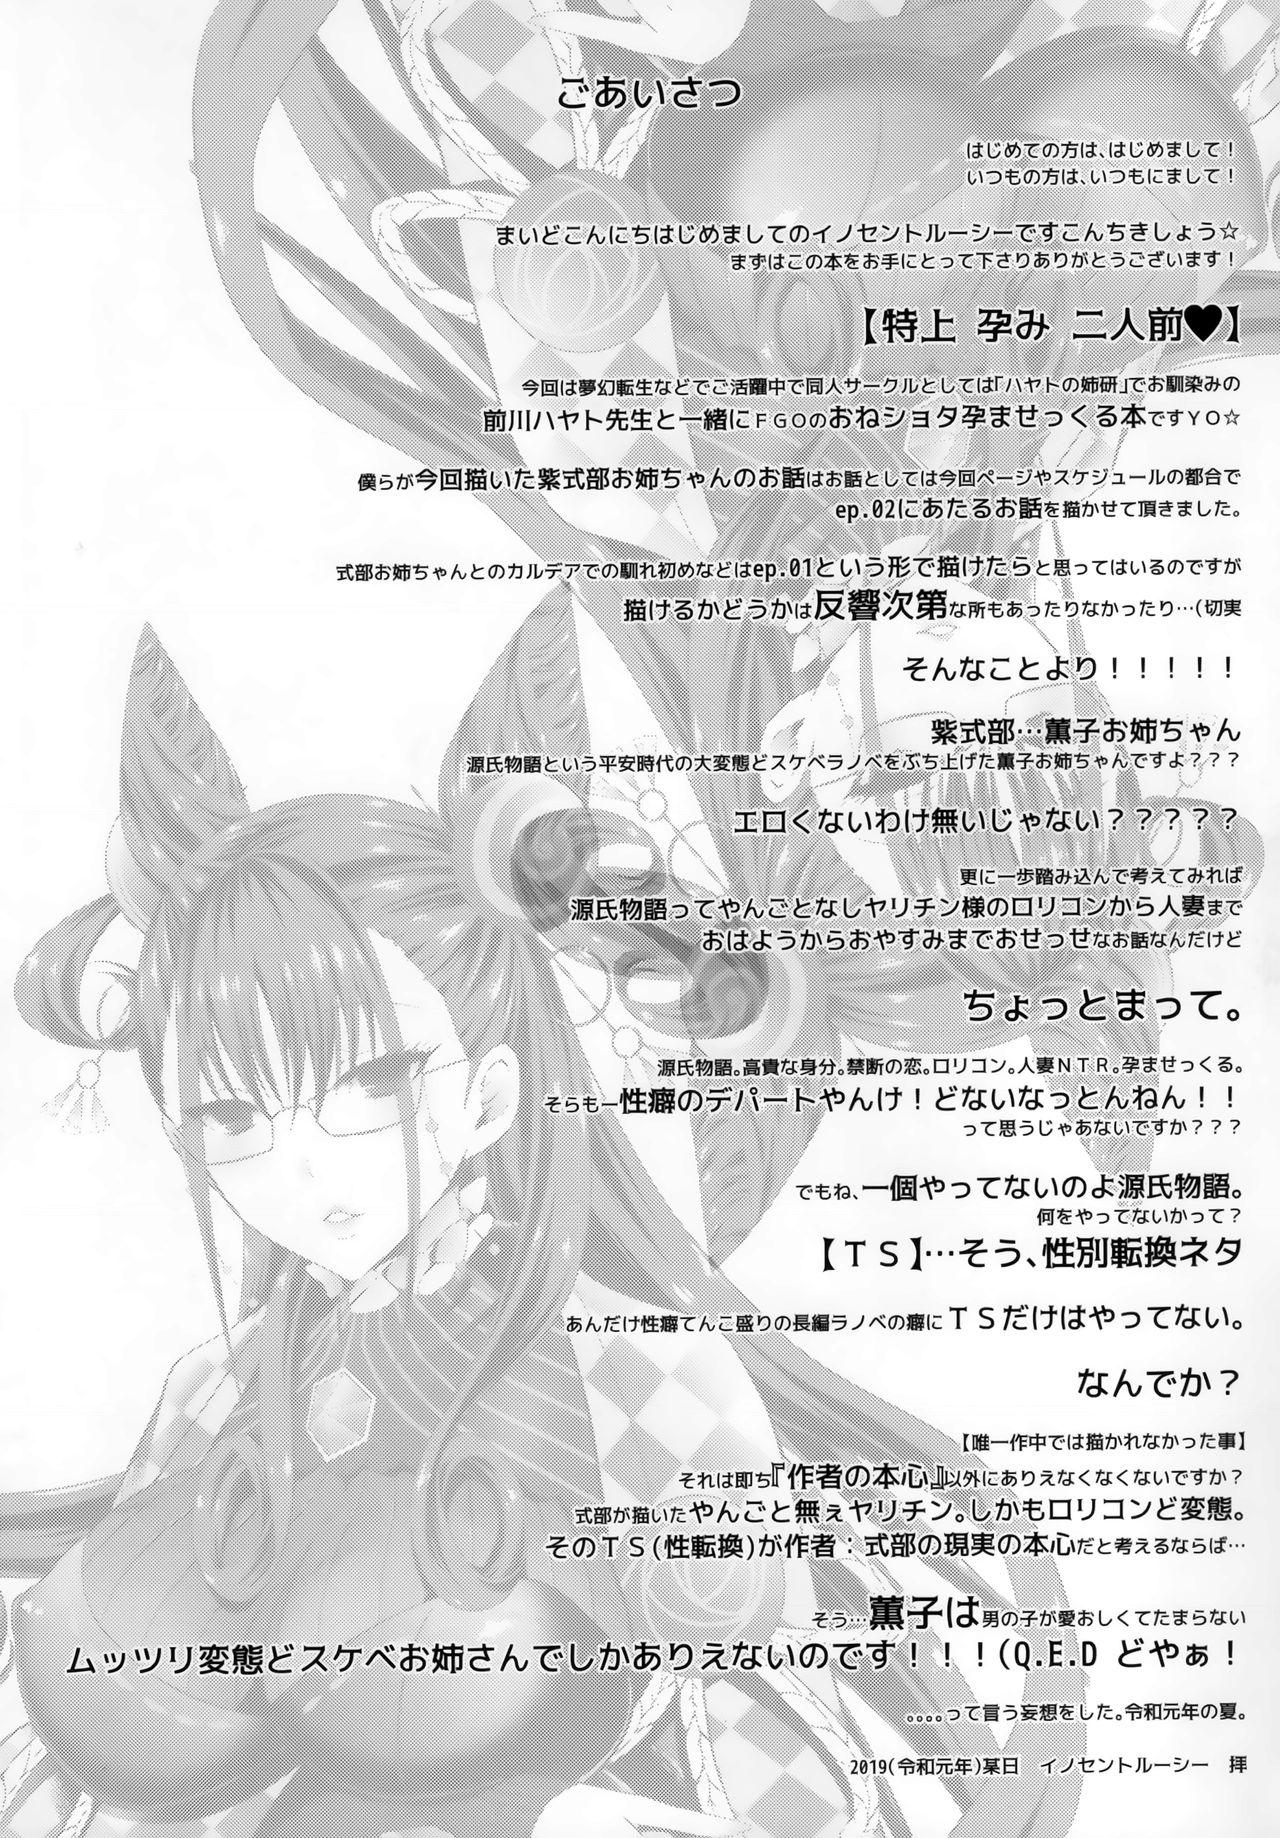 Leather 特上孕み二人前 - Fate grand order Blow - Page 12